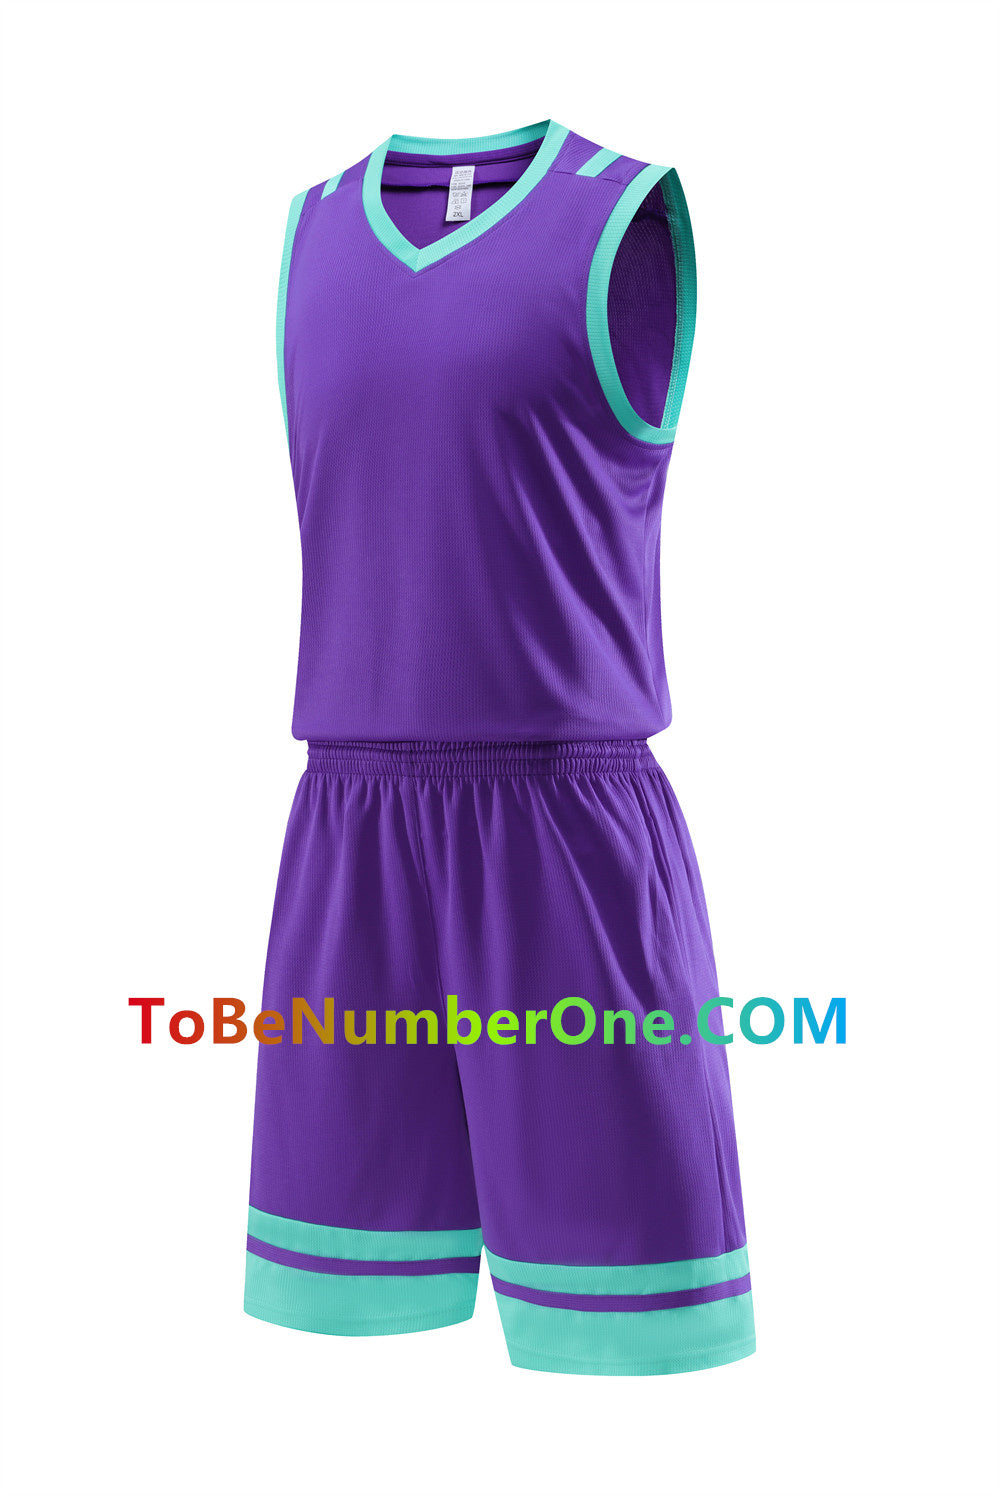 Customize instock High Quality Quick-drying basketball uniforms print with team name , player and number.  jerseys&shorts with pocket 712#